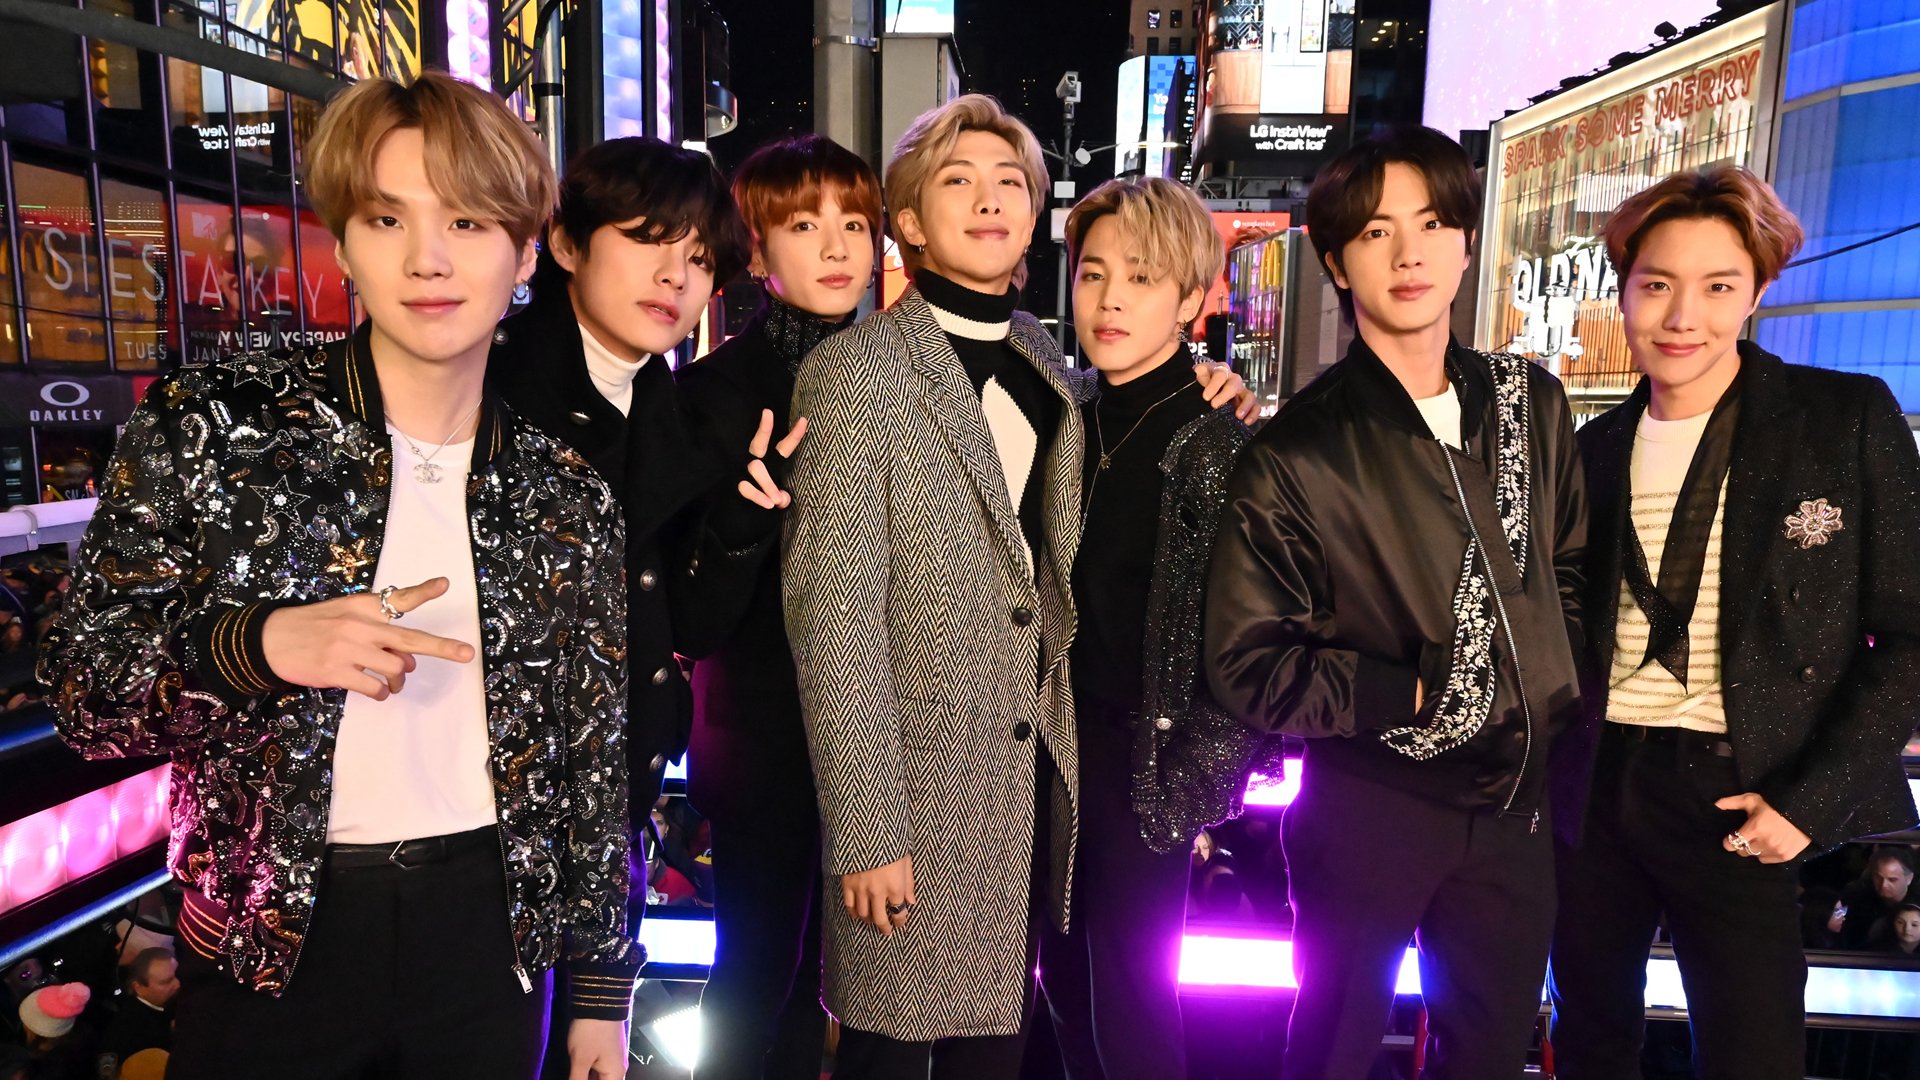 BTS attend Dick Clark's New Year's Rockin' Eve With Ryan Seacrest 2020 on December 31, 2019 in New York City. 